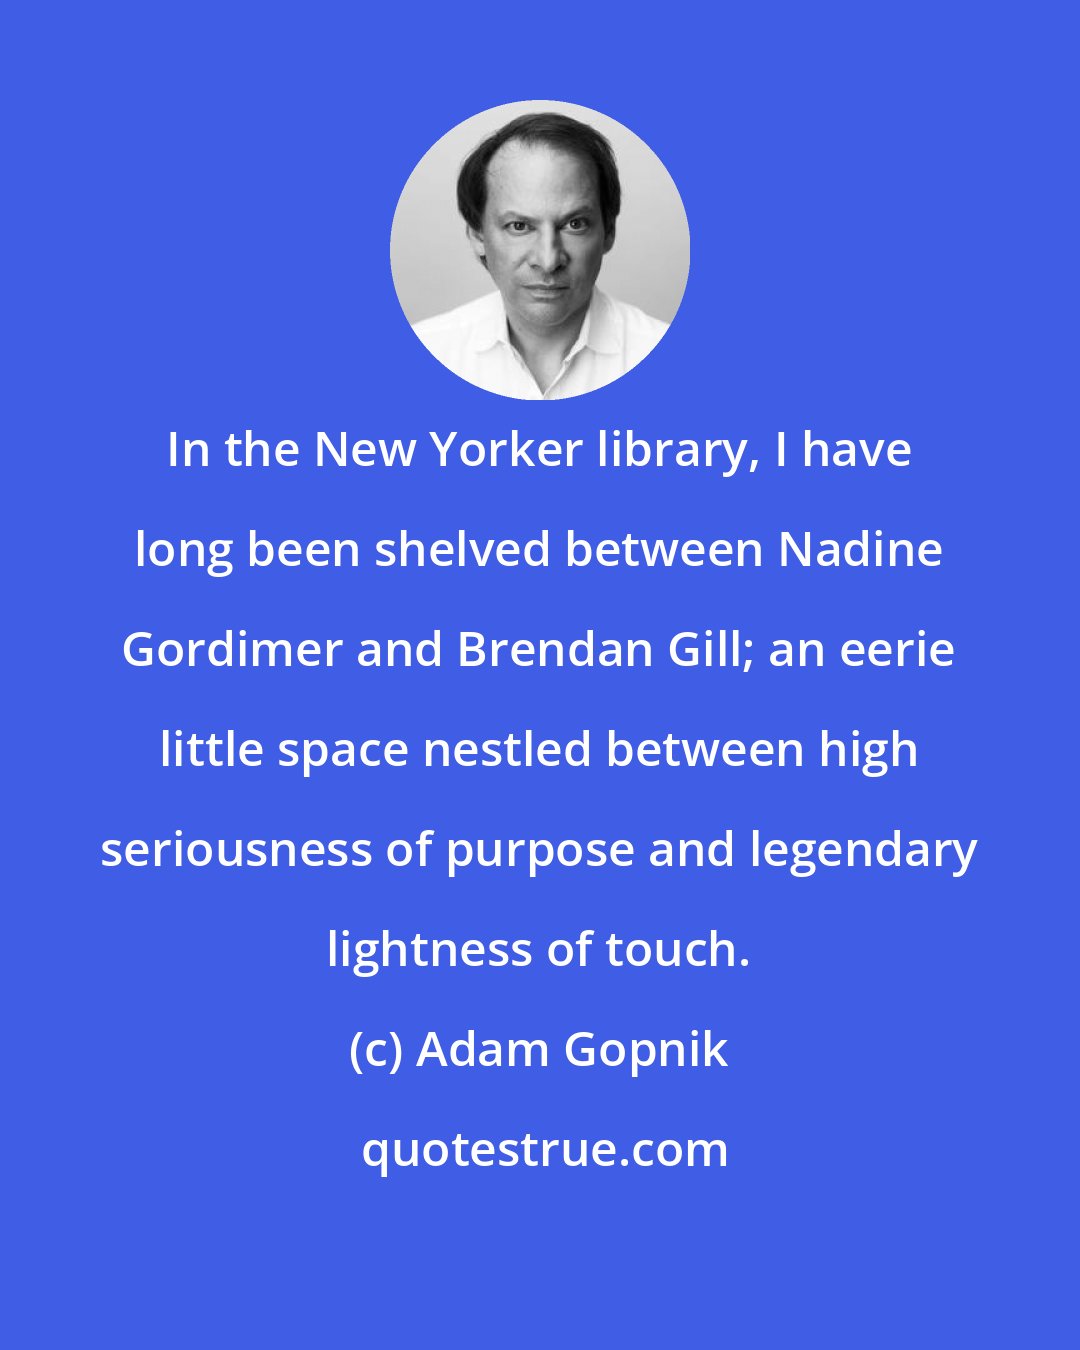 Adam Gopnik: In the New Yorker library, I have long been shelved between Nadine Gordimer and Brendan Gill; an eerie little space nestled between high seriousness of purpose and legendary lightness of touch.